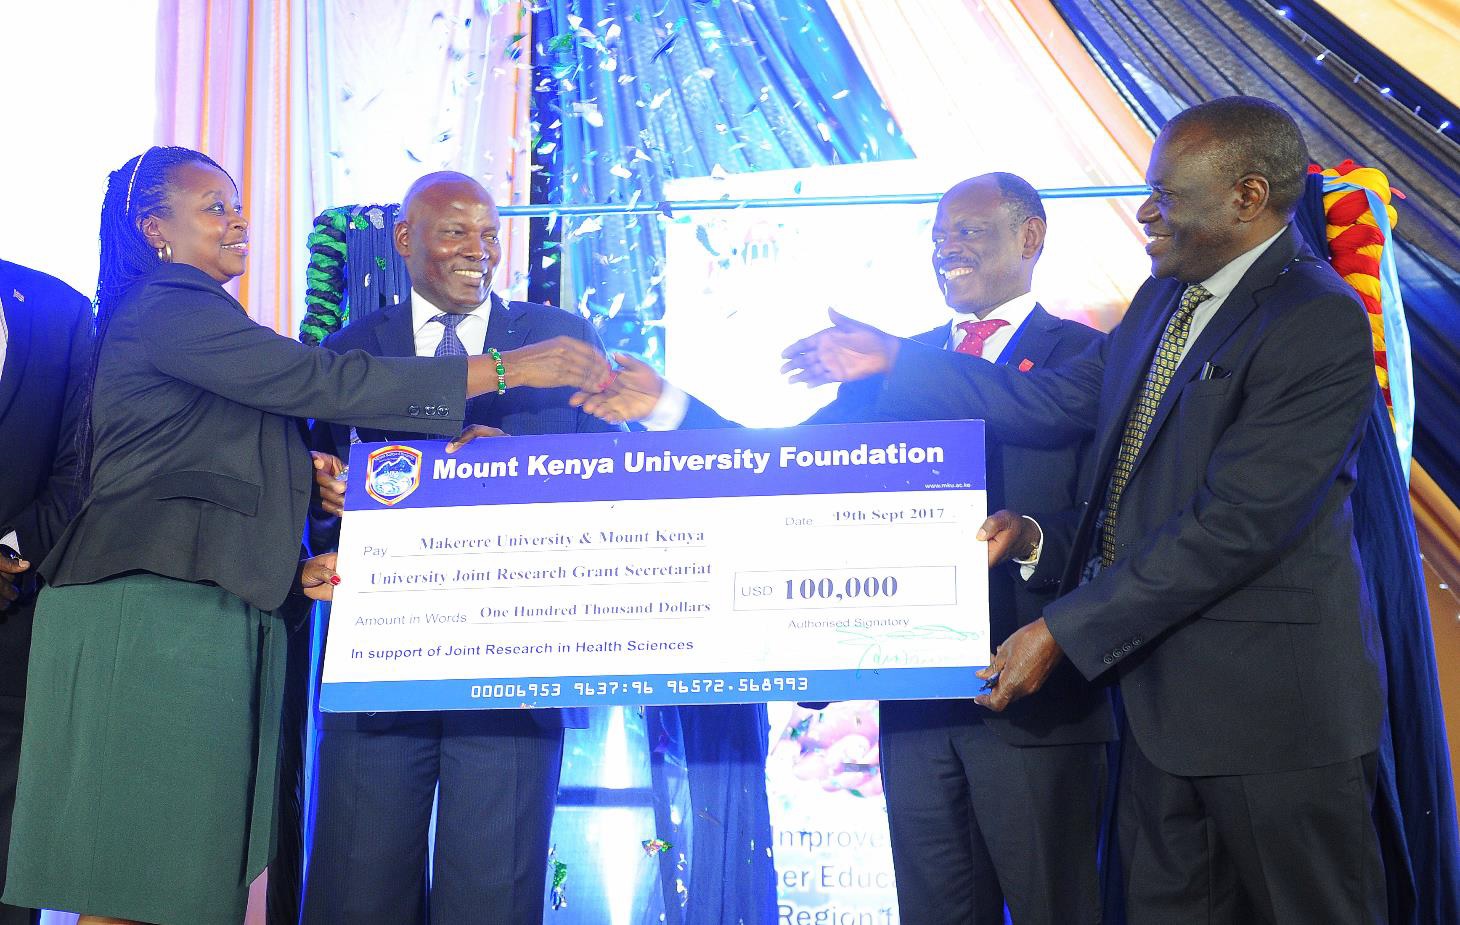 Mount Kenya University founding Vice-Chancellor Prof. Stanley Waudo {right} and Makere University Vice-Chancellor Prof. Barnabas Nawangwe { second right } receive a cheque of 10 million Kenyan shillings from MKU member Board of Directors and representative of MKU Foundation Patron, Dr. Jane Nyutu {left} and MKU Pro-Chancellor Dr. Vincent Gaitho, during the launch of MKU and Makere University College of Health Science seed grant.